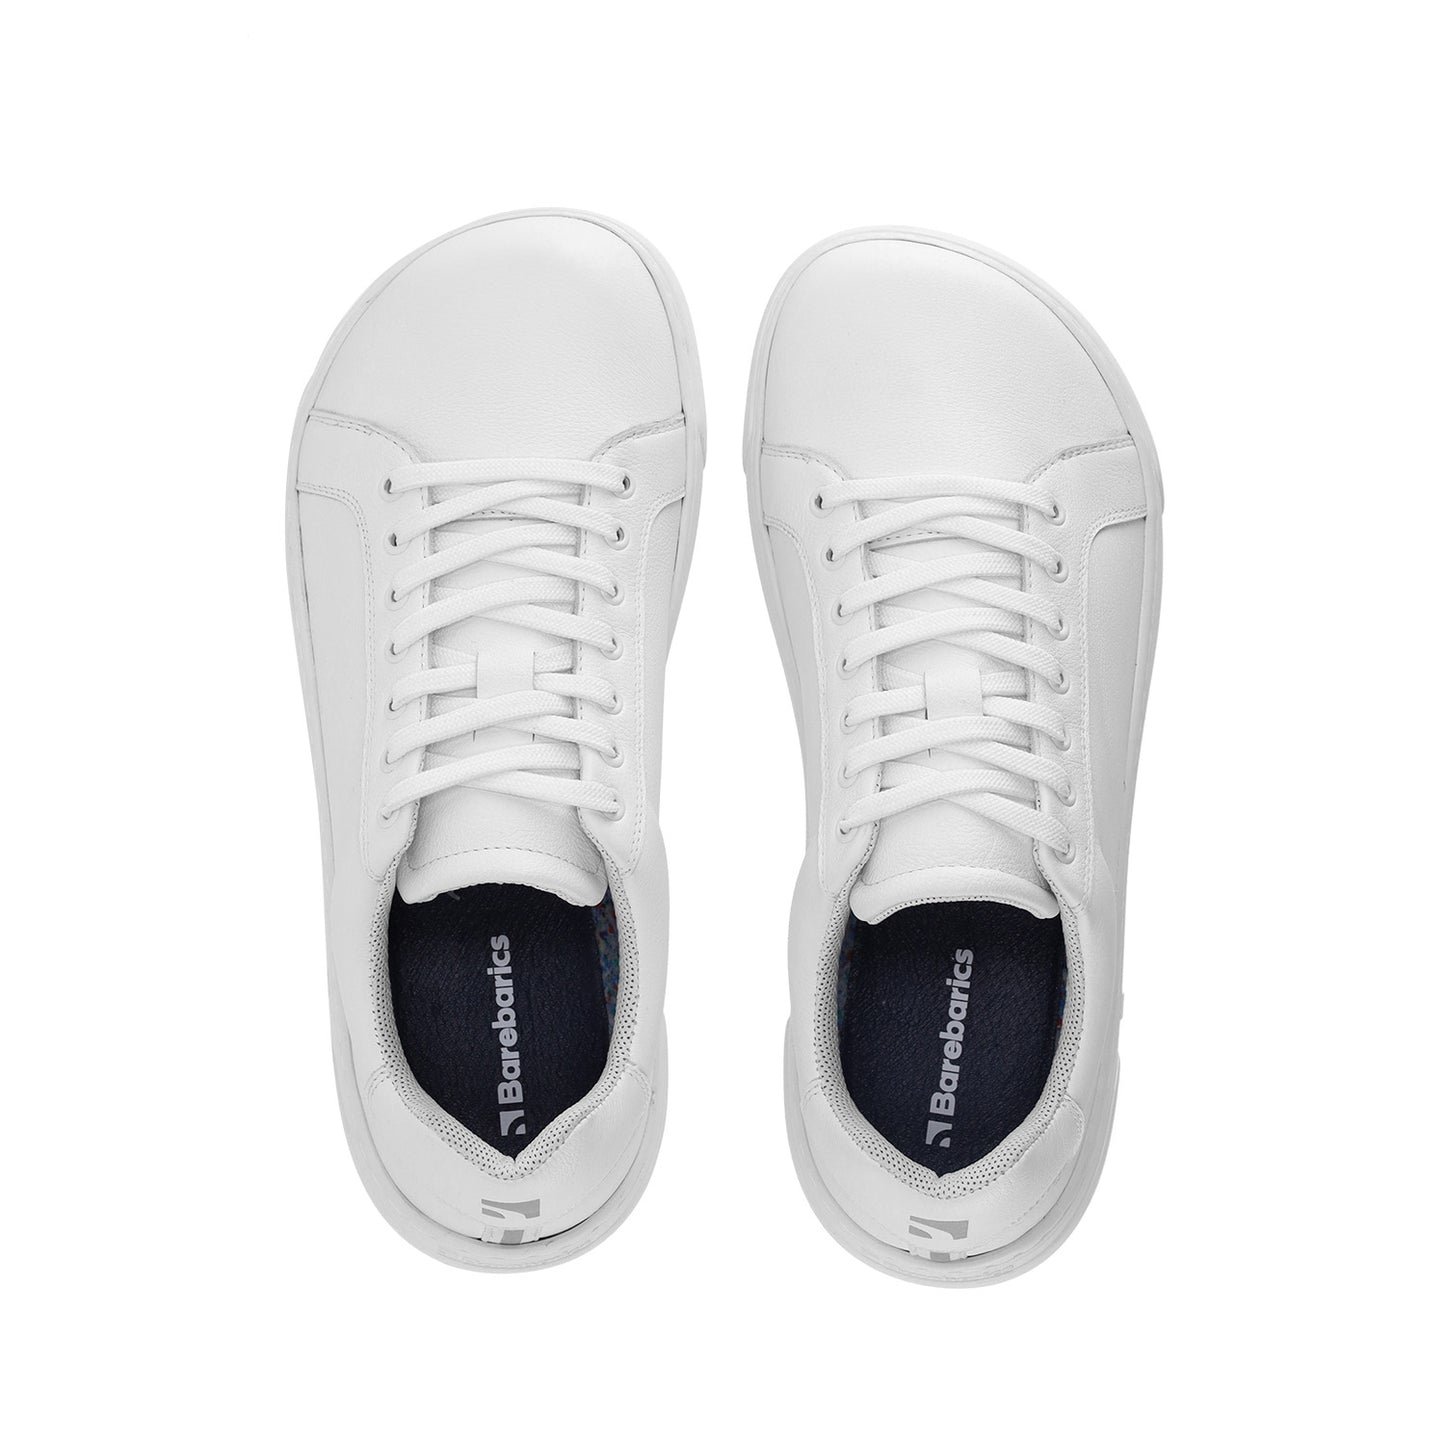 Barebarics Zoom Barefoot Sneakers - All White (Leather)